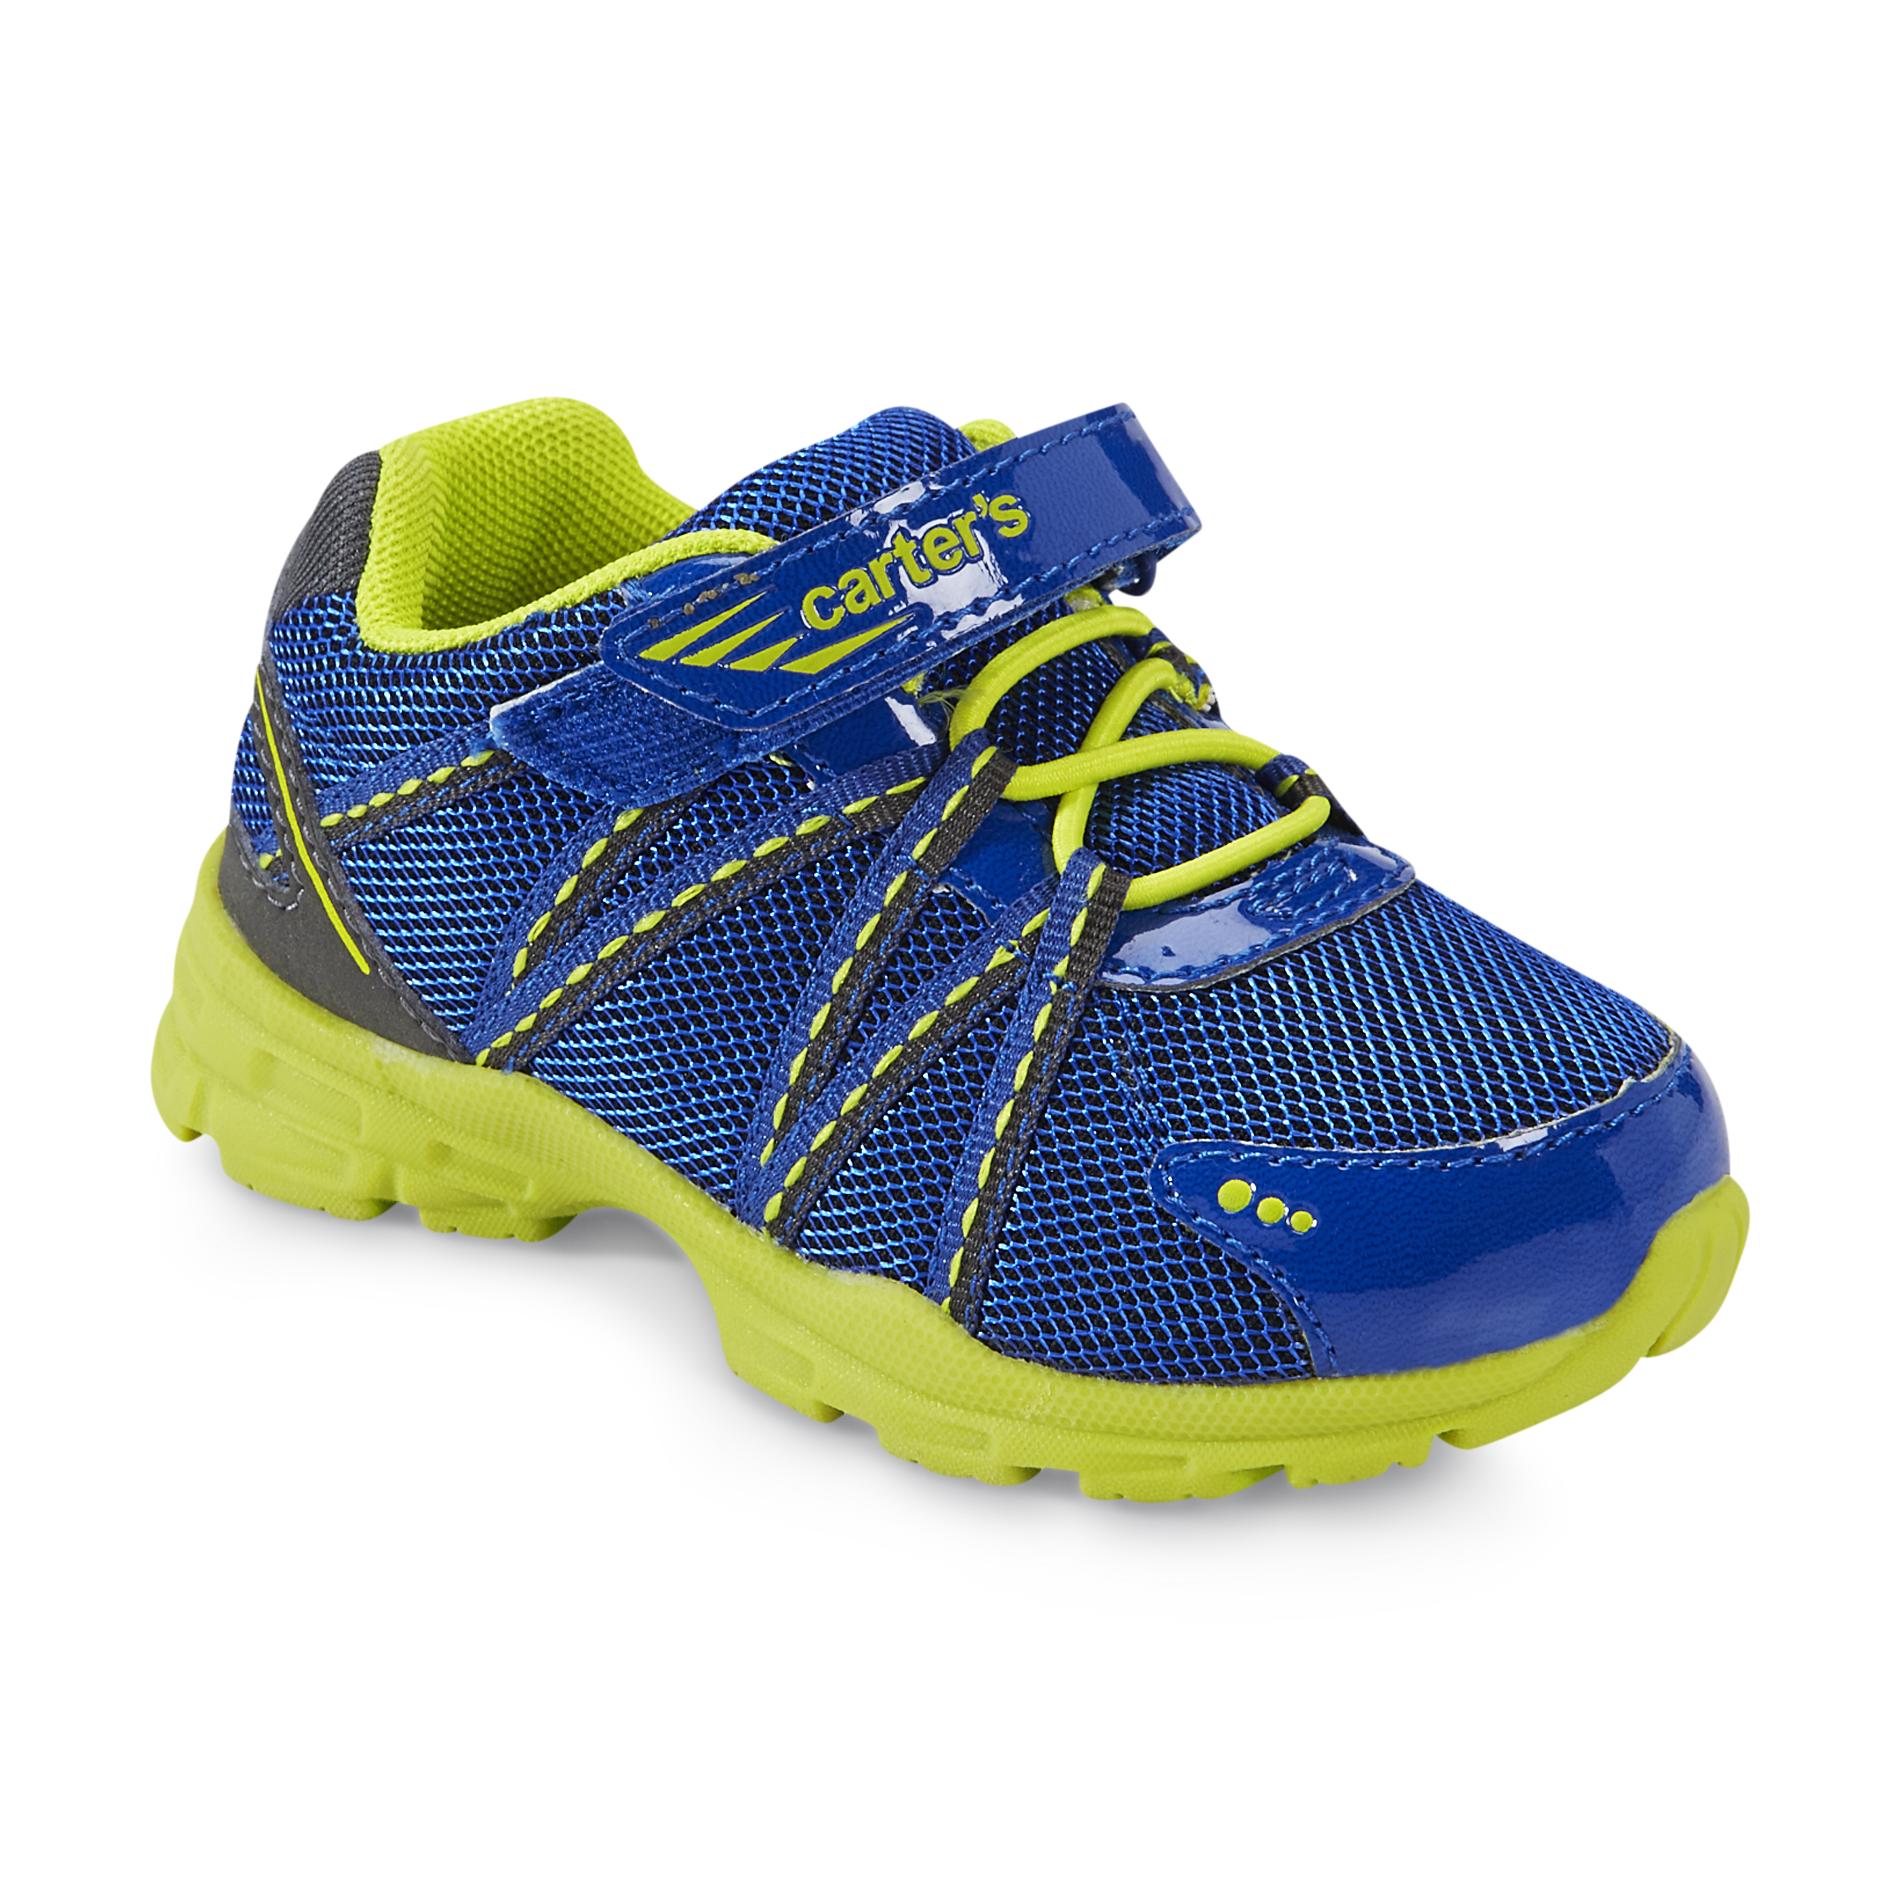 Toddler Boy's Rush Athletic Shoe - Blue/Lime